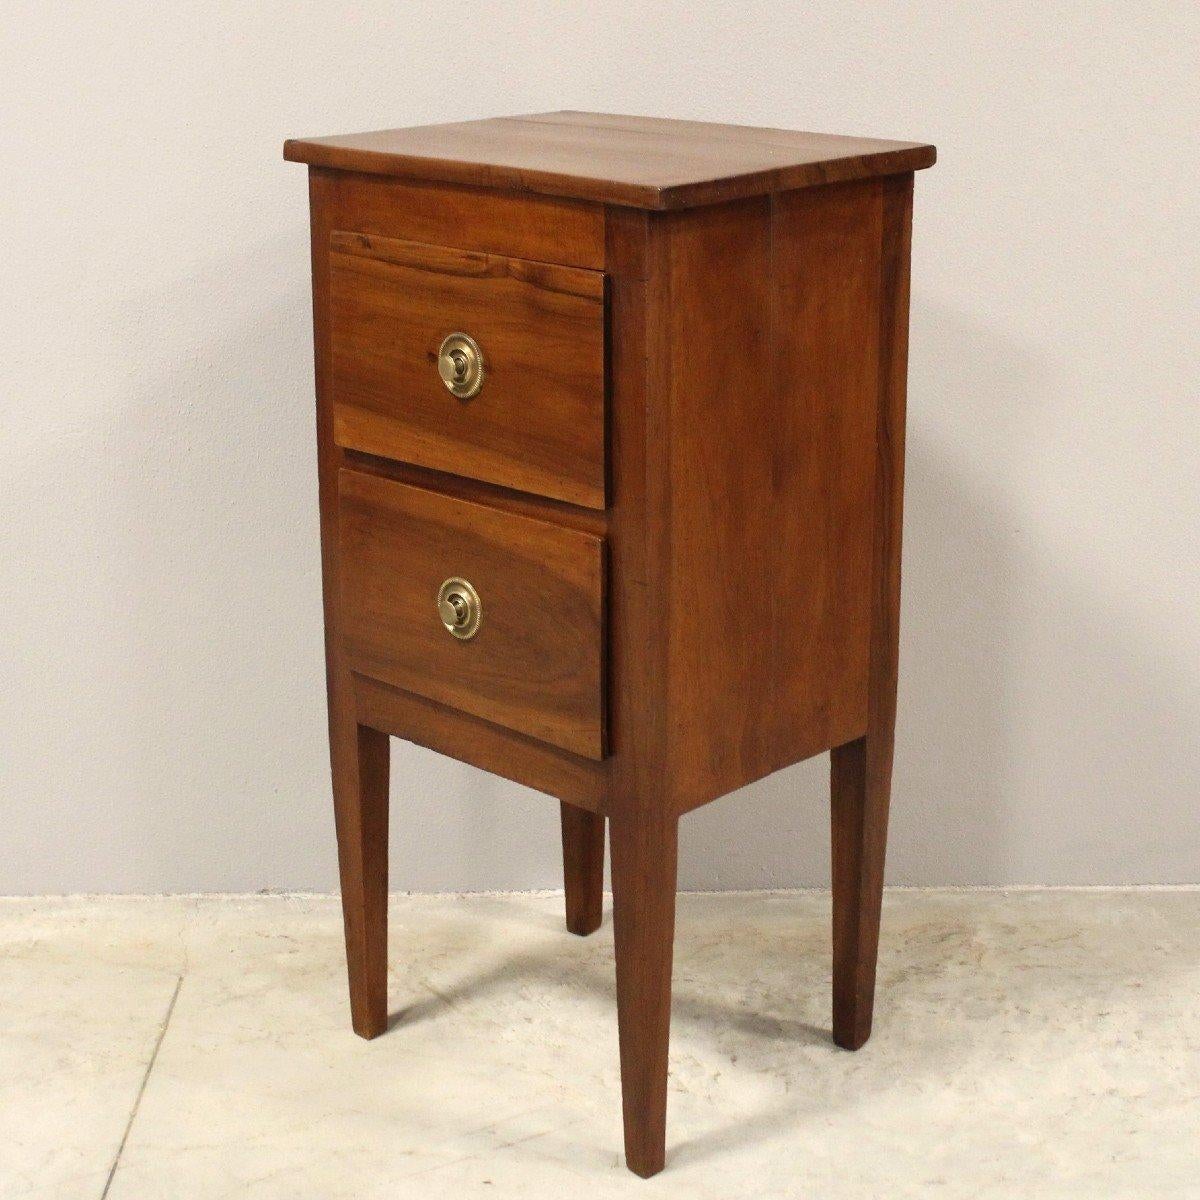 18th Century Italian Walnut Bedside Table with Two Drawers and Tapered Legs 4